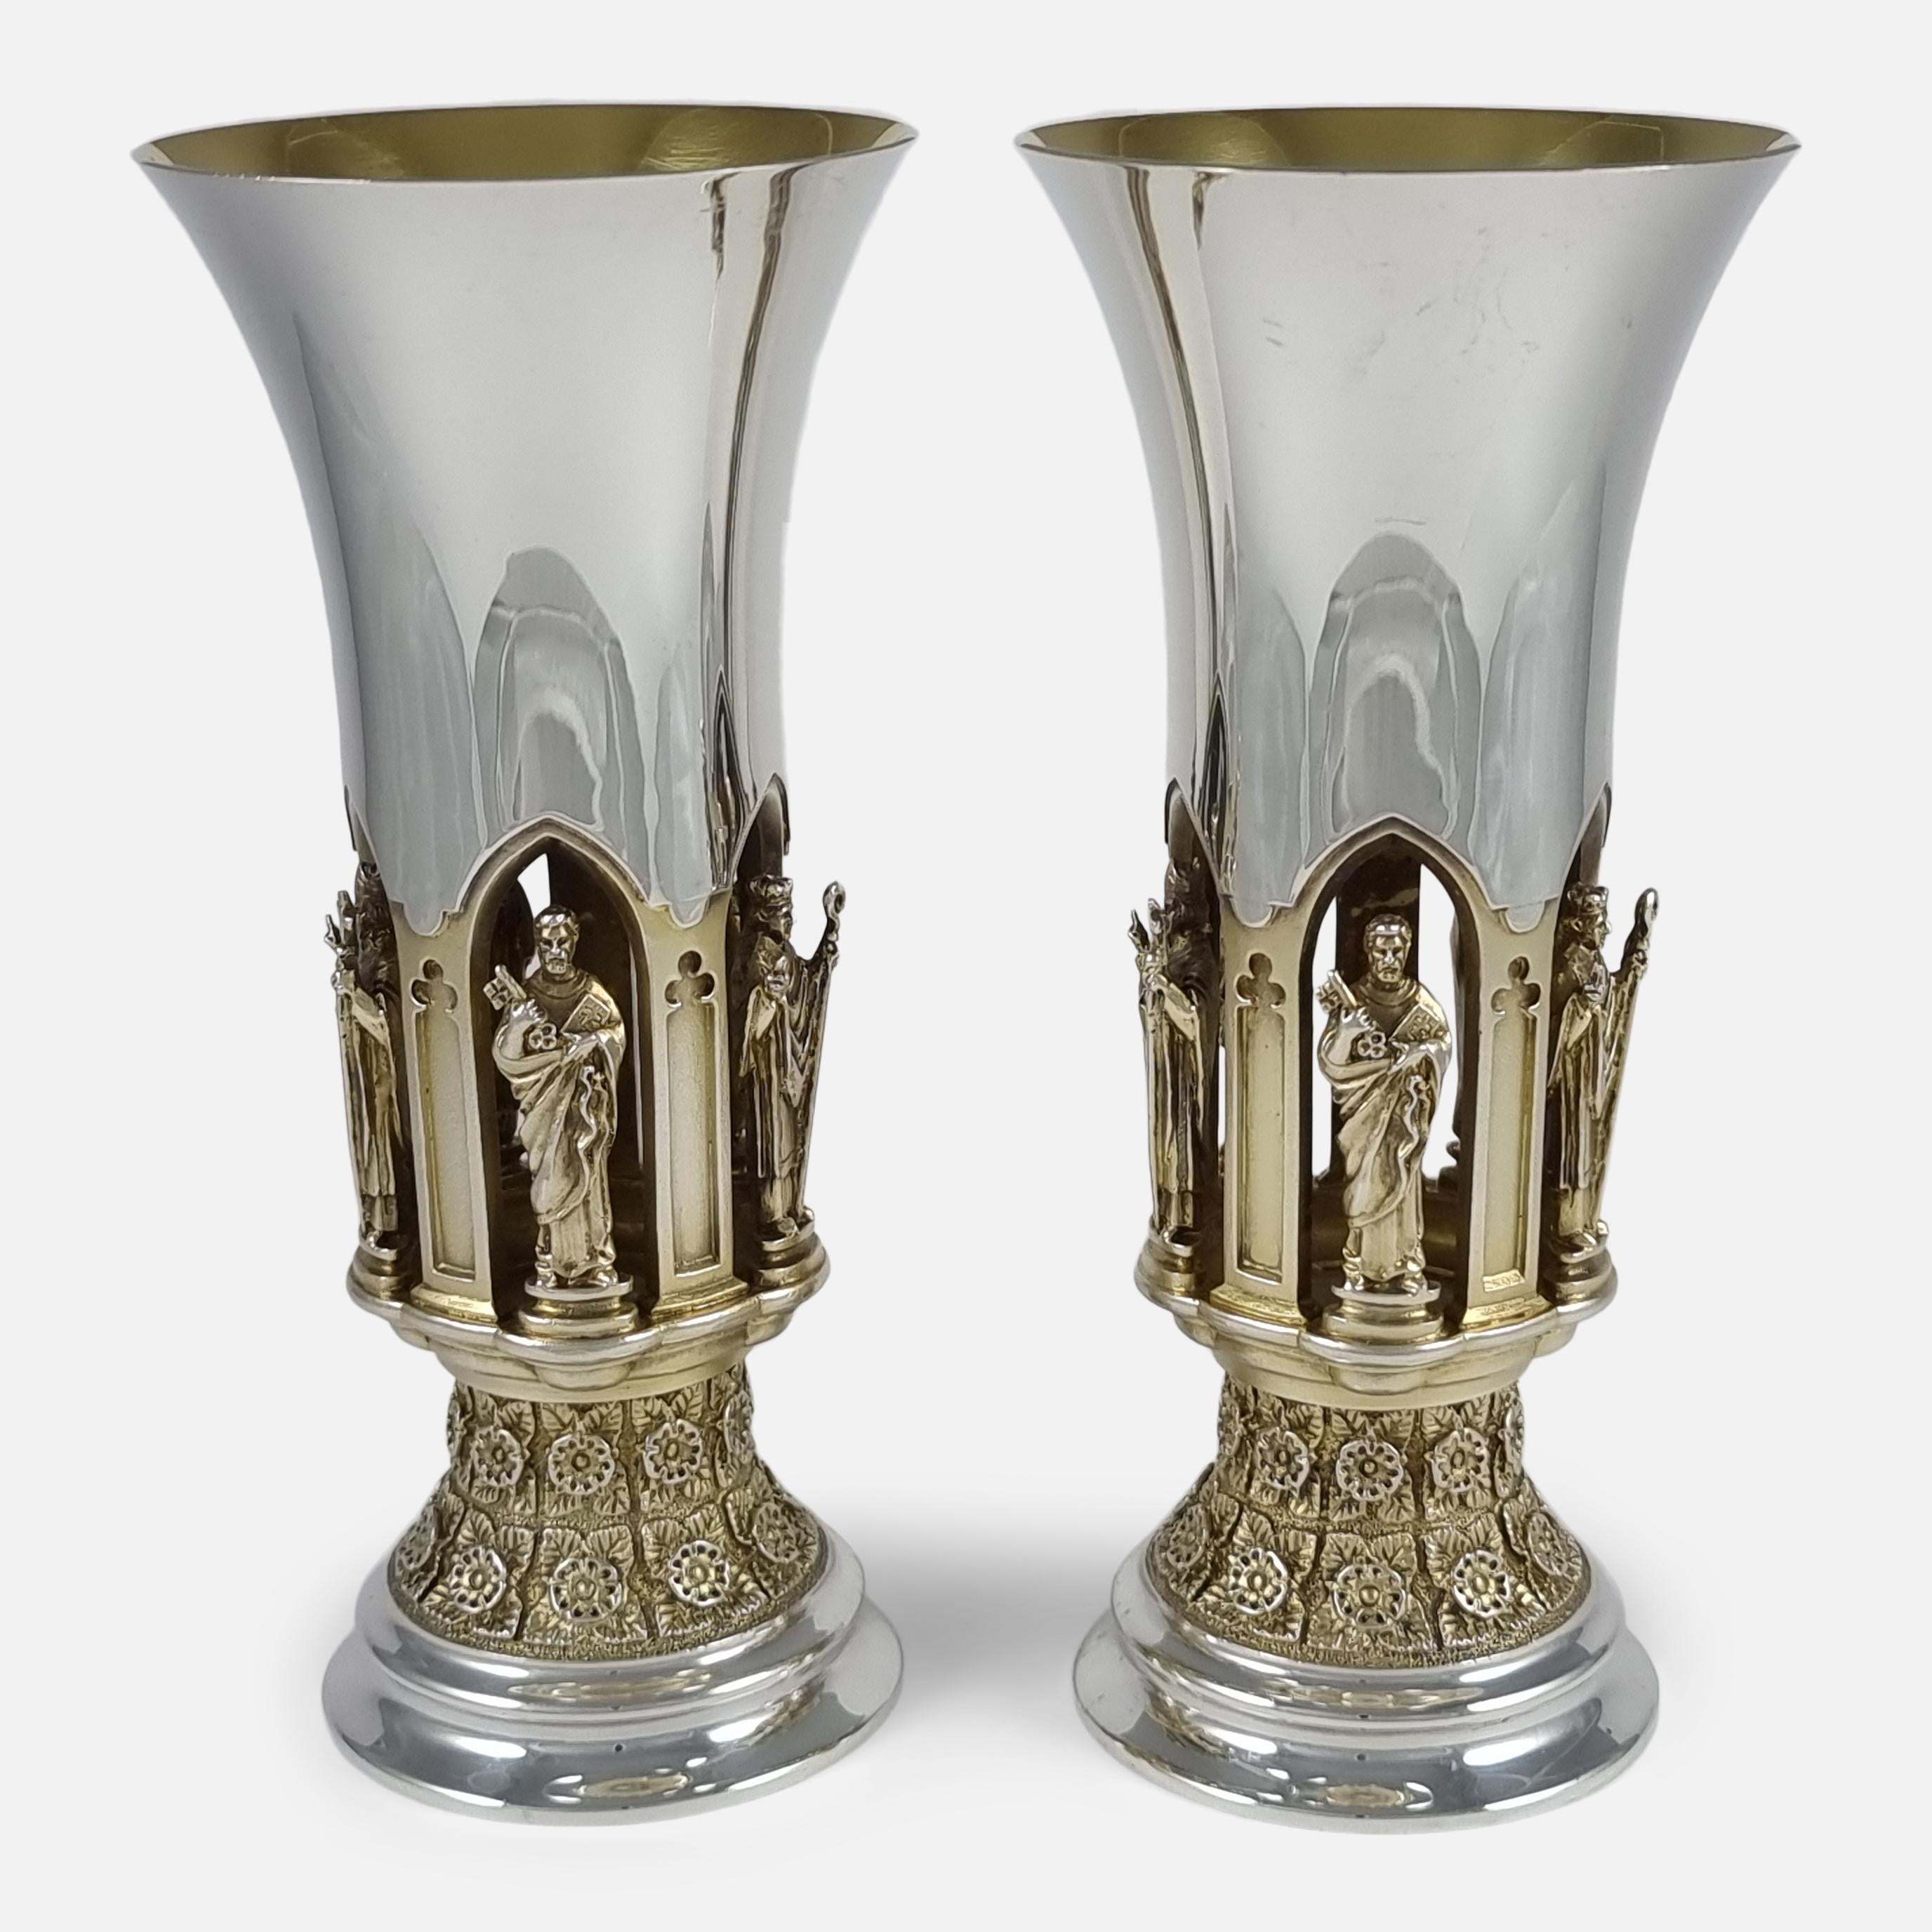 Modern Pair of Aurum Silver Gilt 'Ripon Diocese Foundation' Goblets by Hector Miller